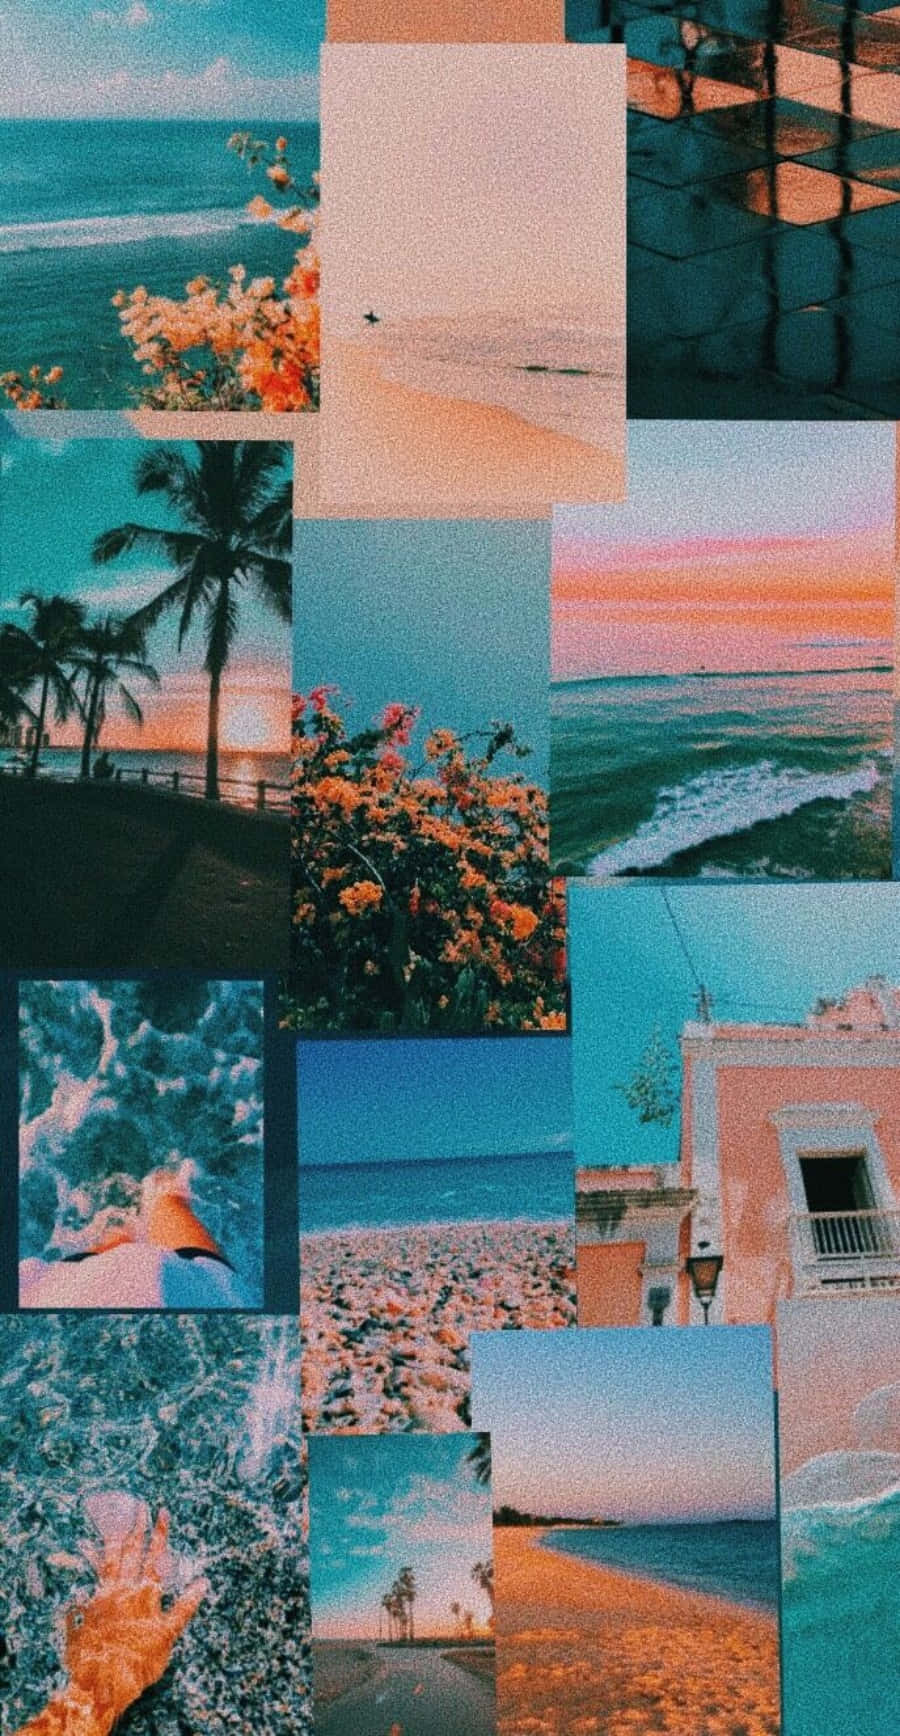 A collage of blue and pink aesthetic photos of the beach - Colorful, vintage, coral, bright